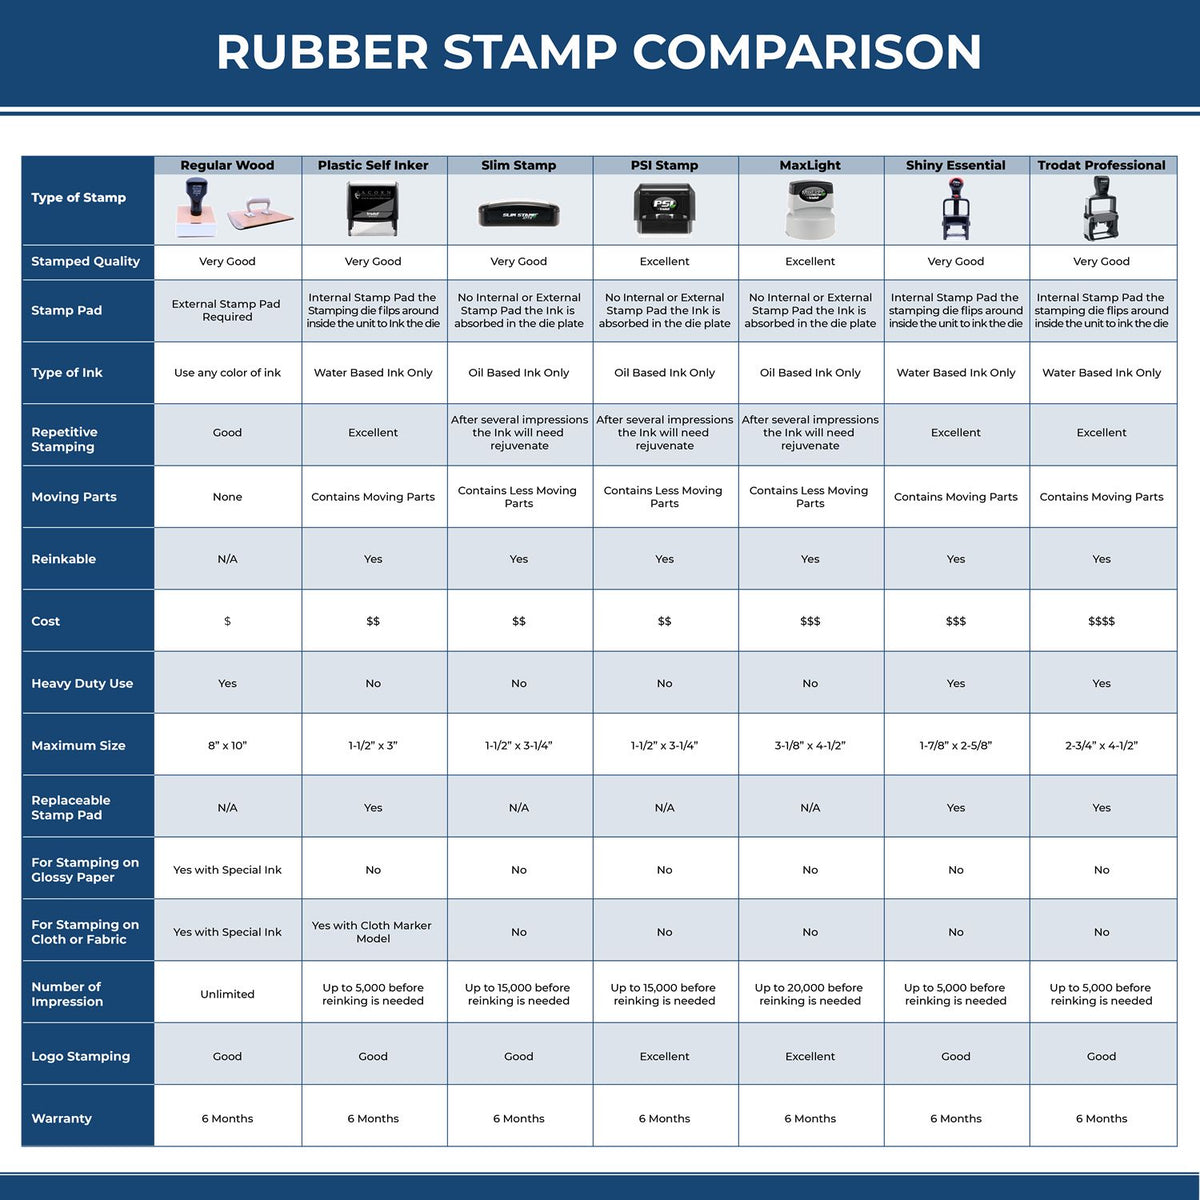 Large Self-Inking Bold Copy Stamp 4897S Rubber Stamp Comparison